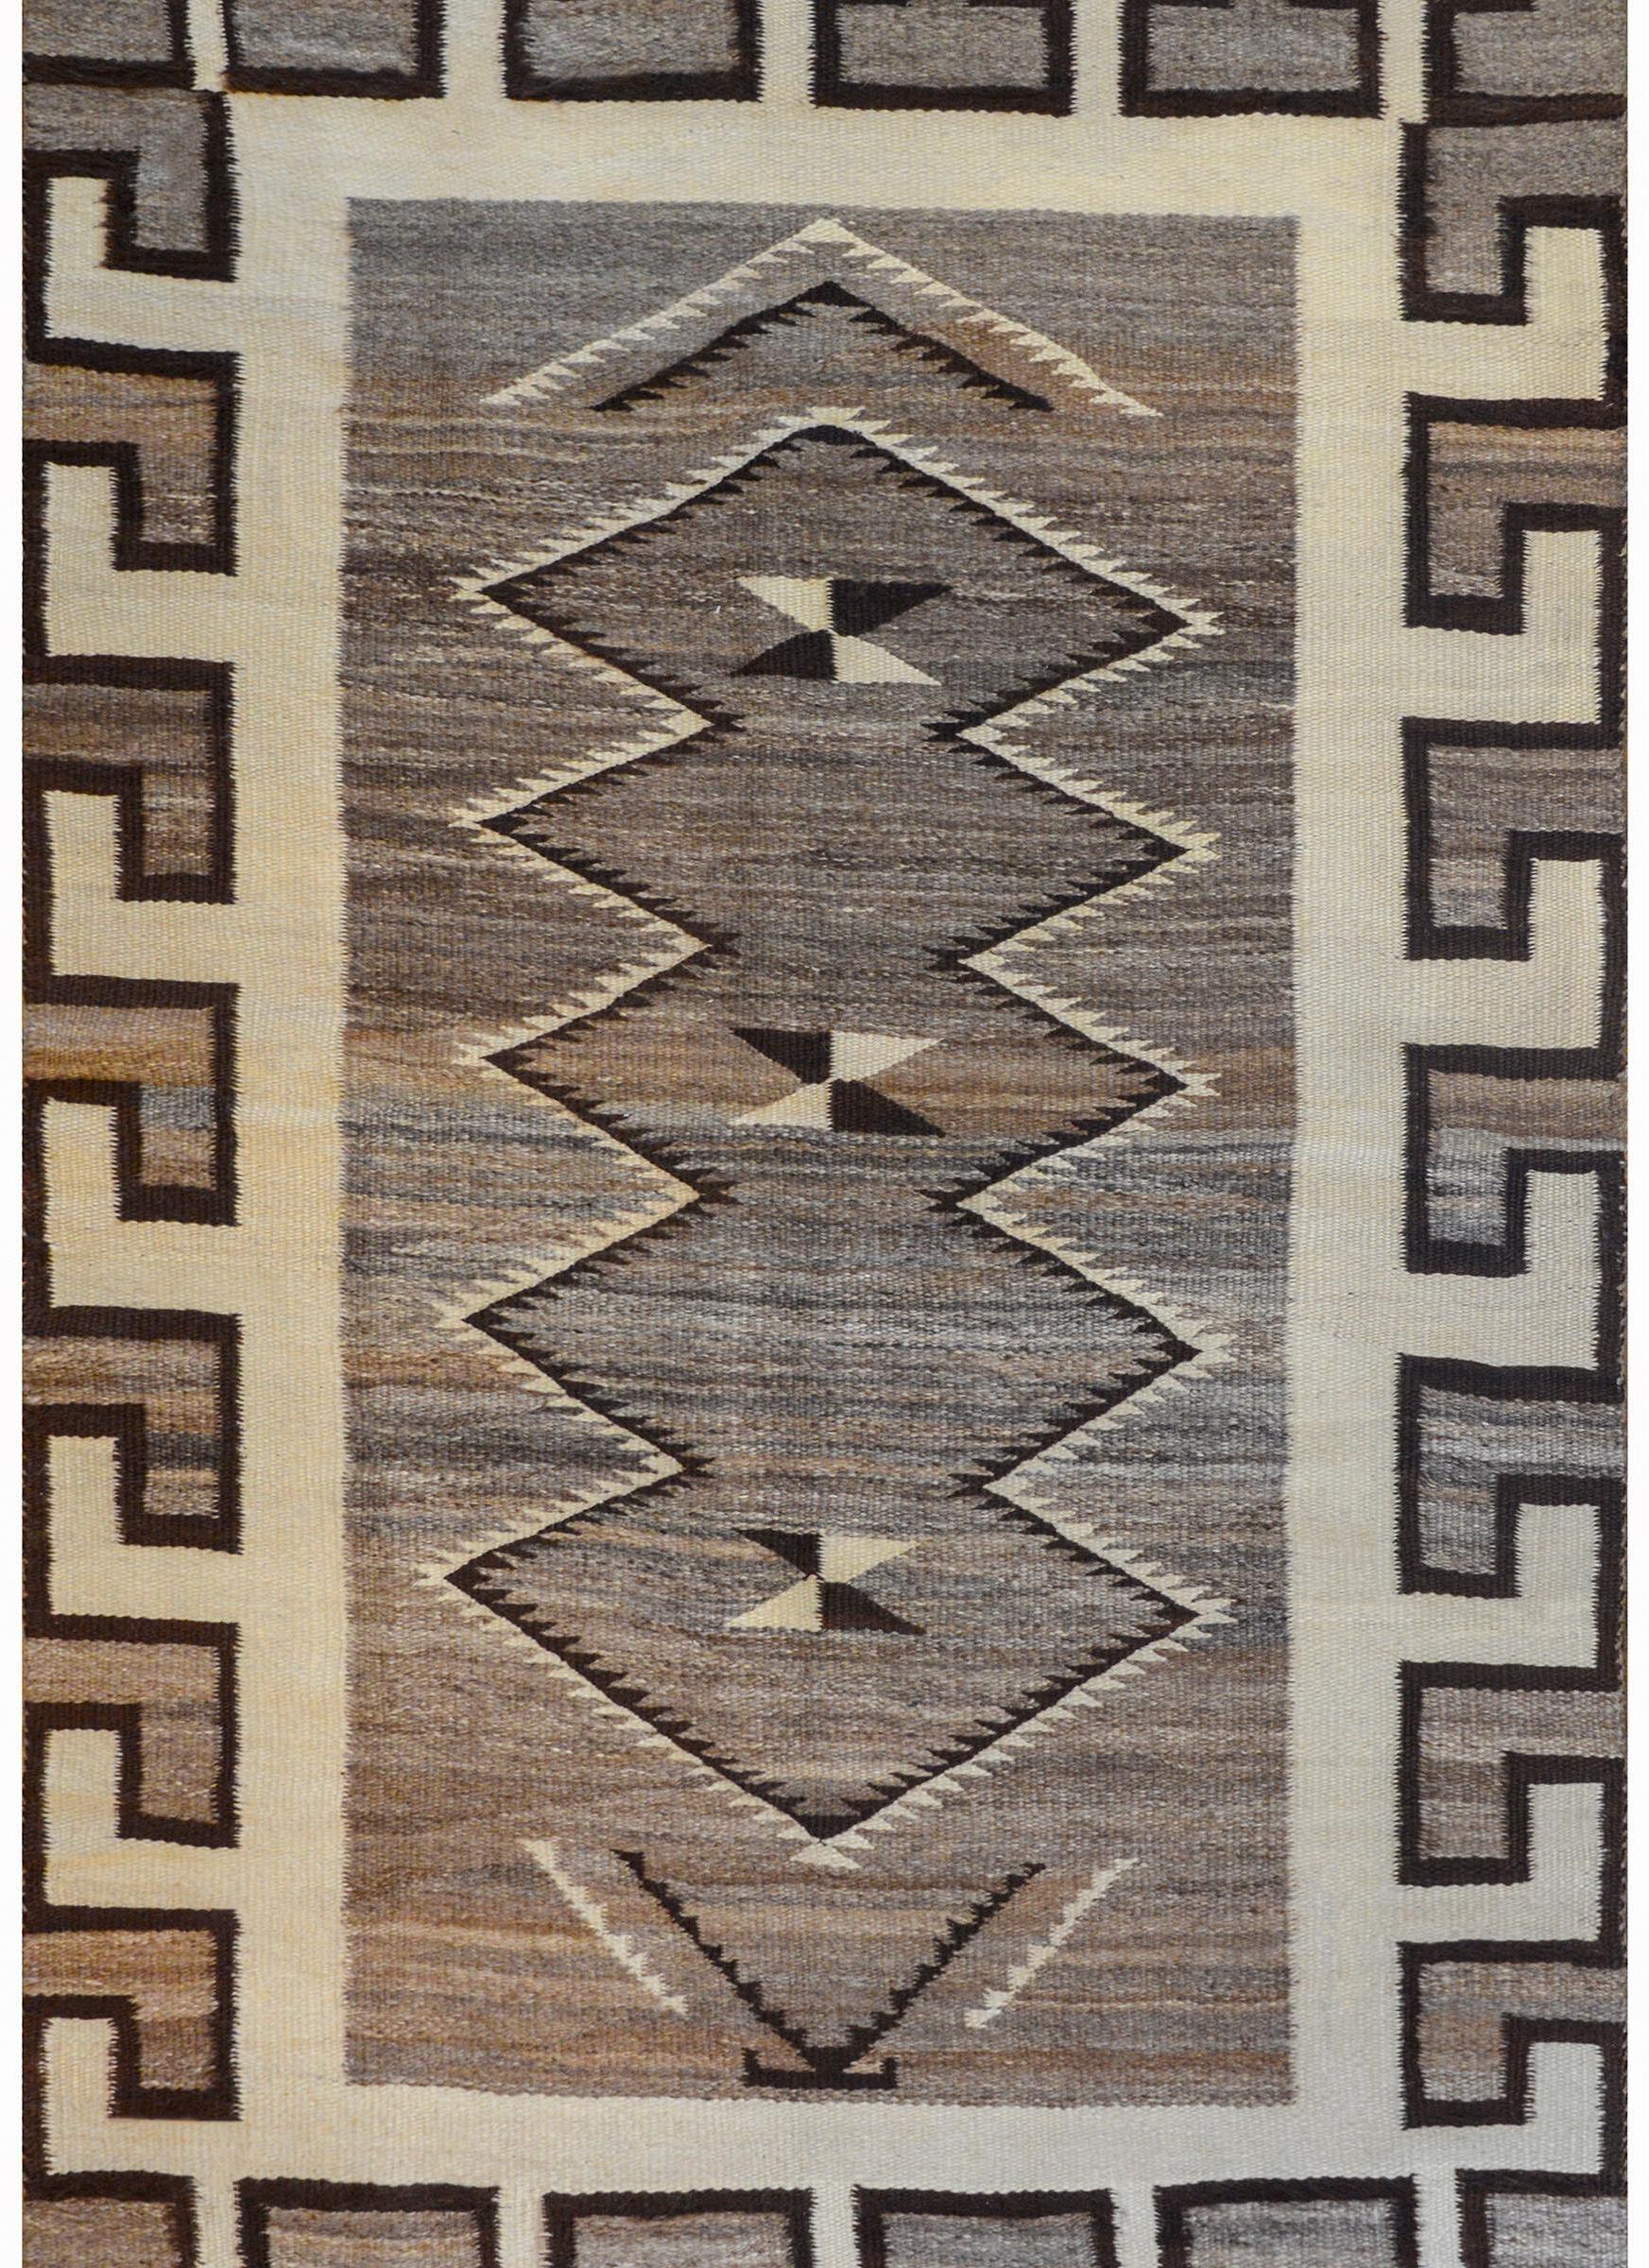 A bold early 20th century Navajo rug with a wonderful large-scale white meandering motif surrounding an abrash gray field with a large zigzag patterned motif.